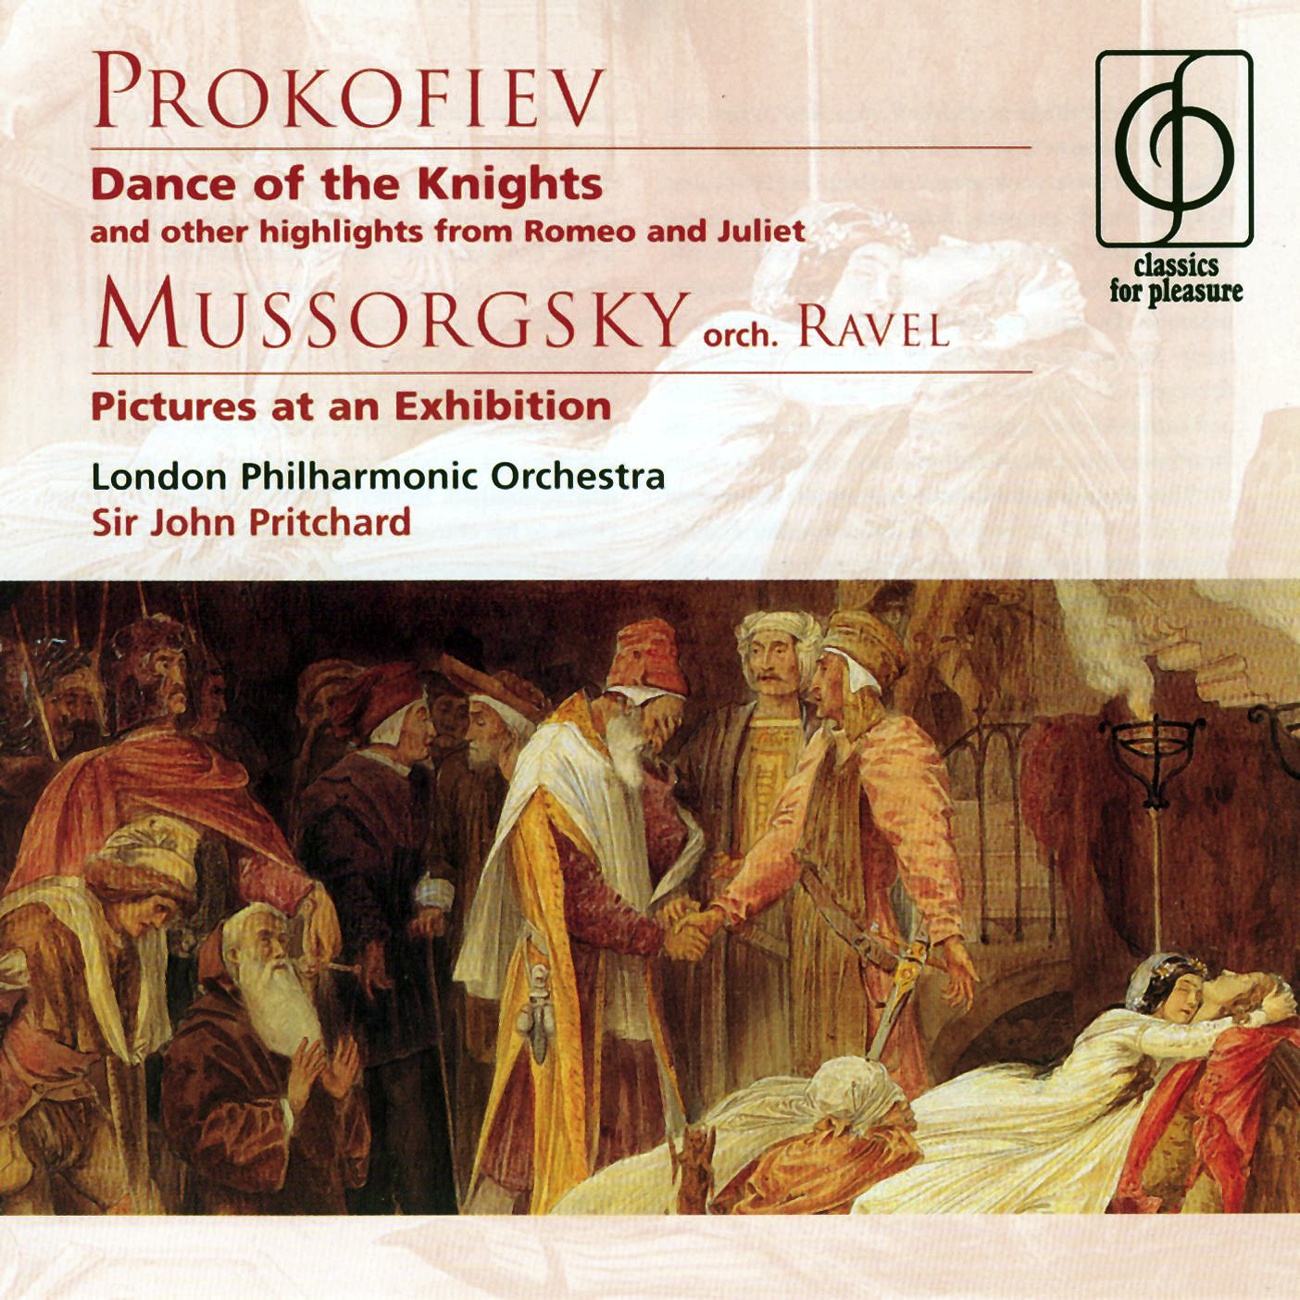 Pictures at an Exhibition (orch. Ravel) (1970 Digital Remaster): The Gnome